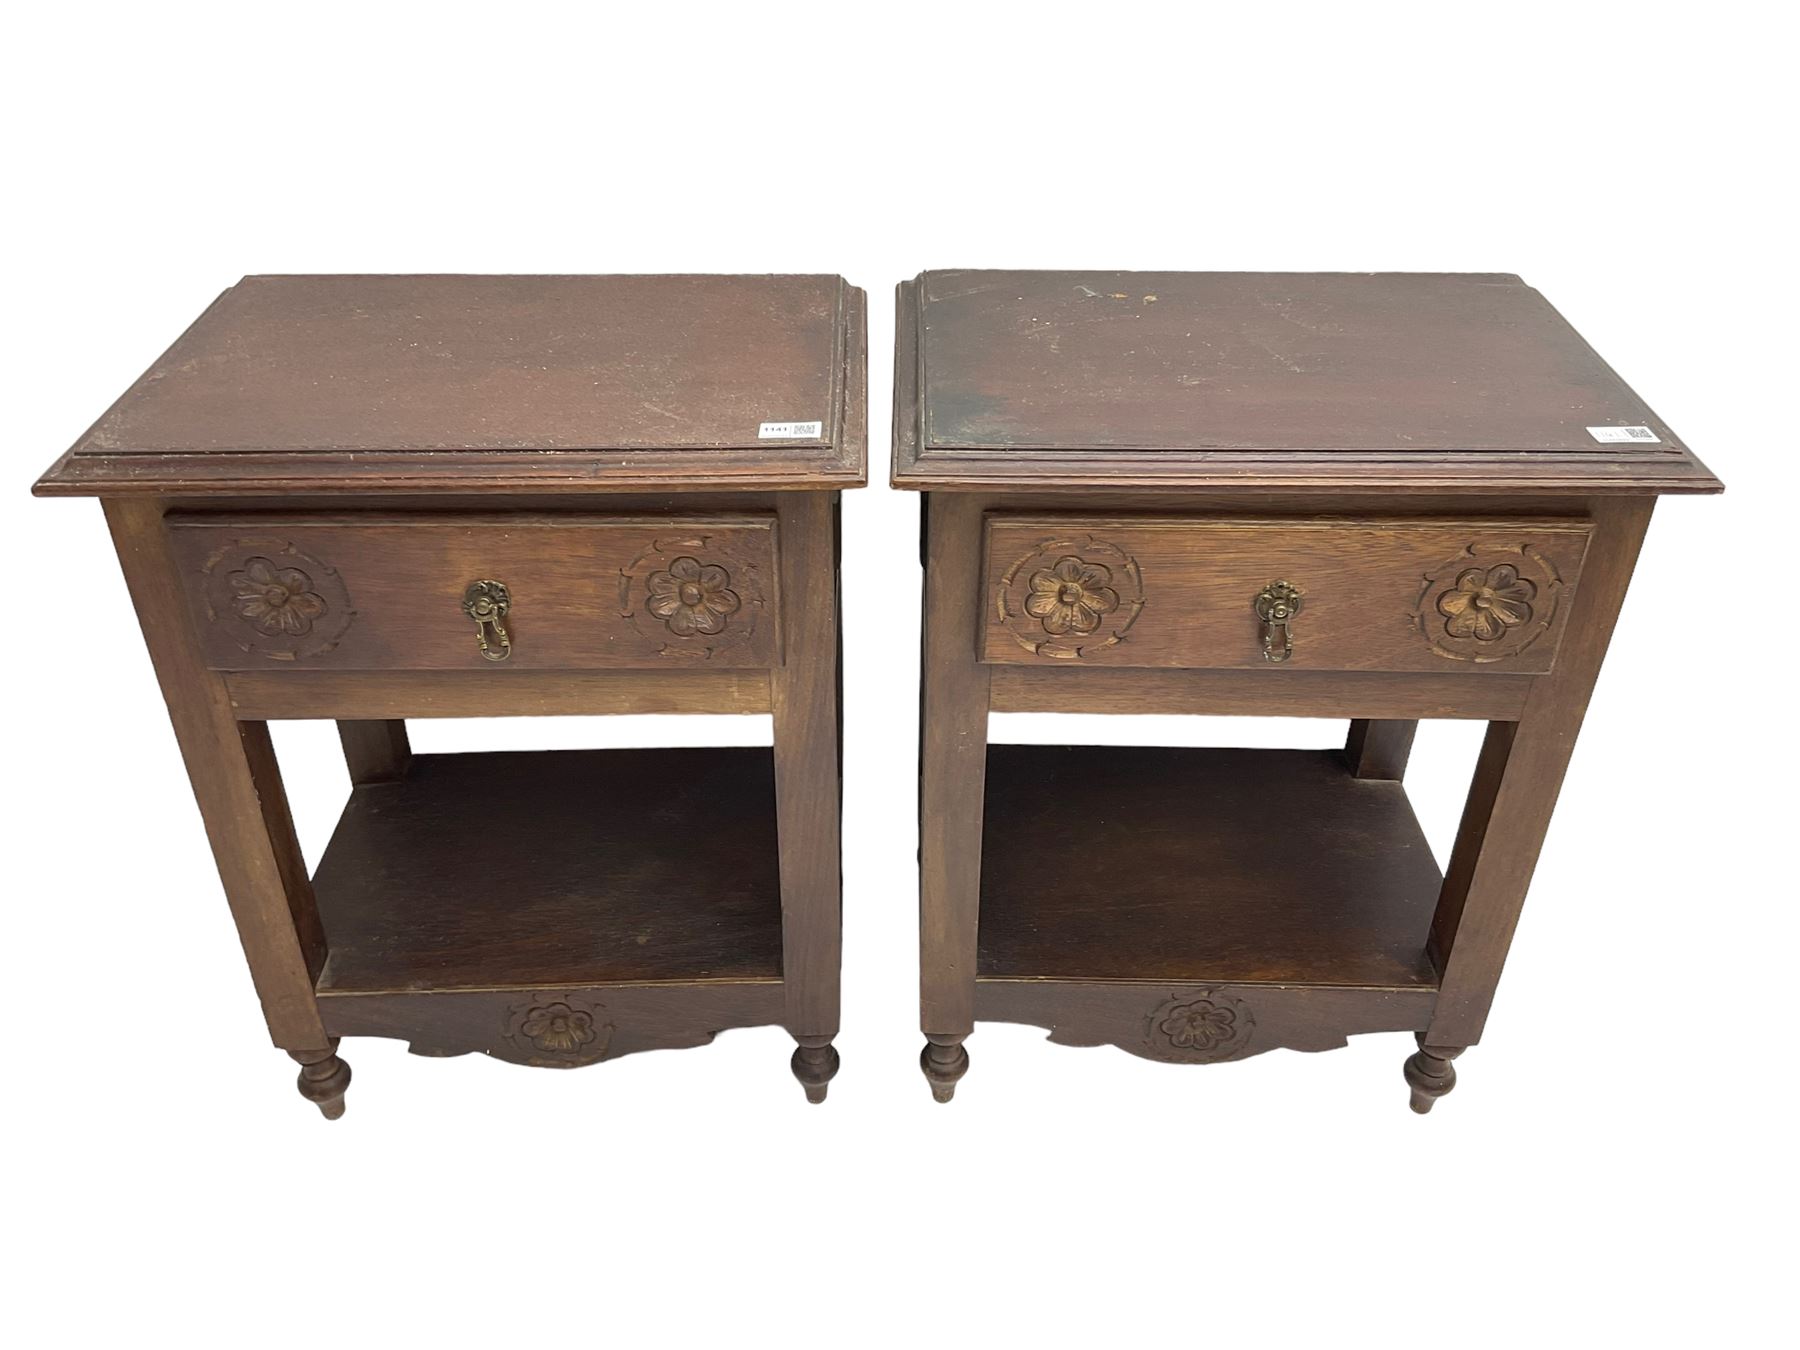 Pair of Portuguese two-tier bedside tables - Image 3 of 6